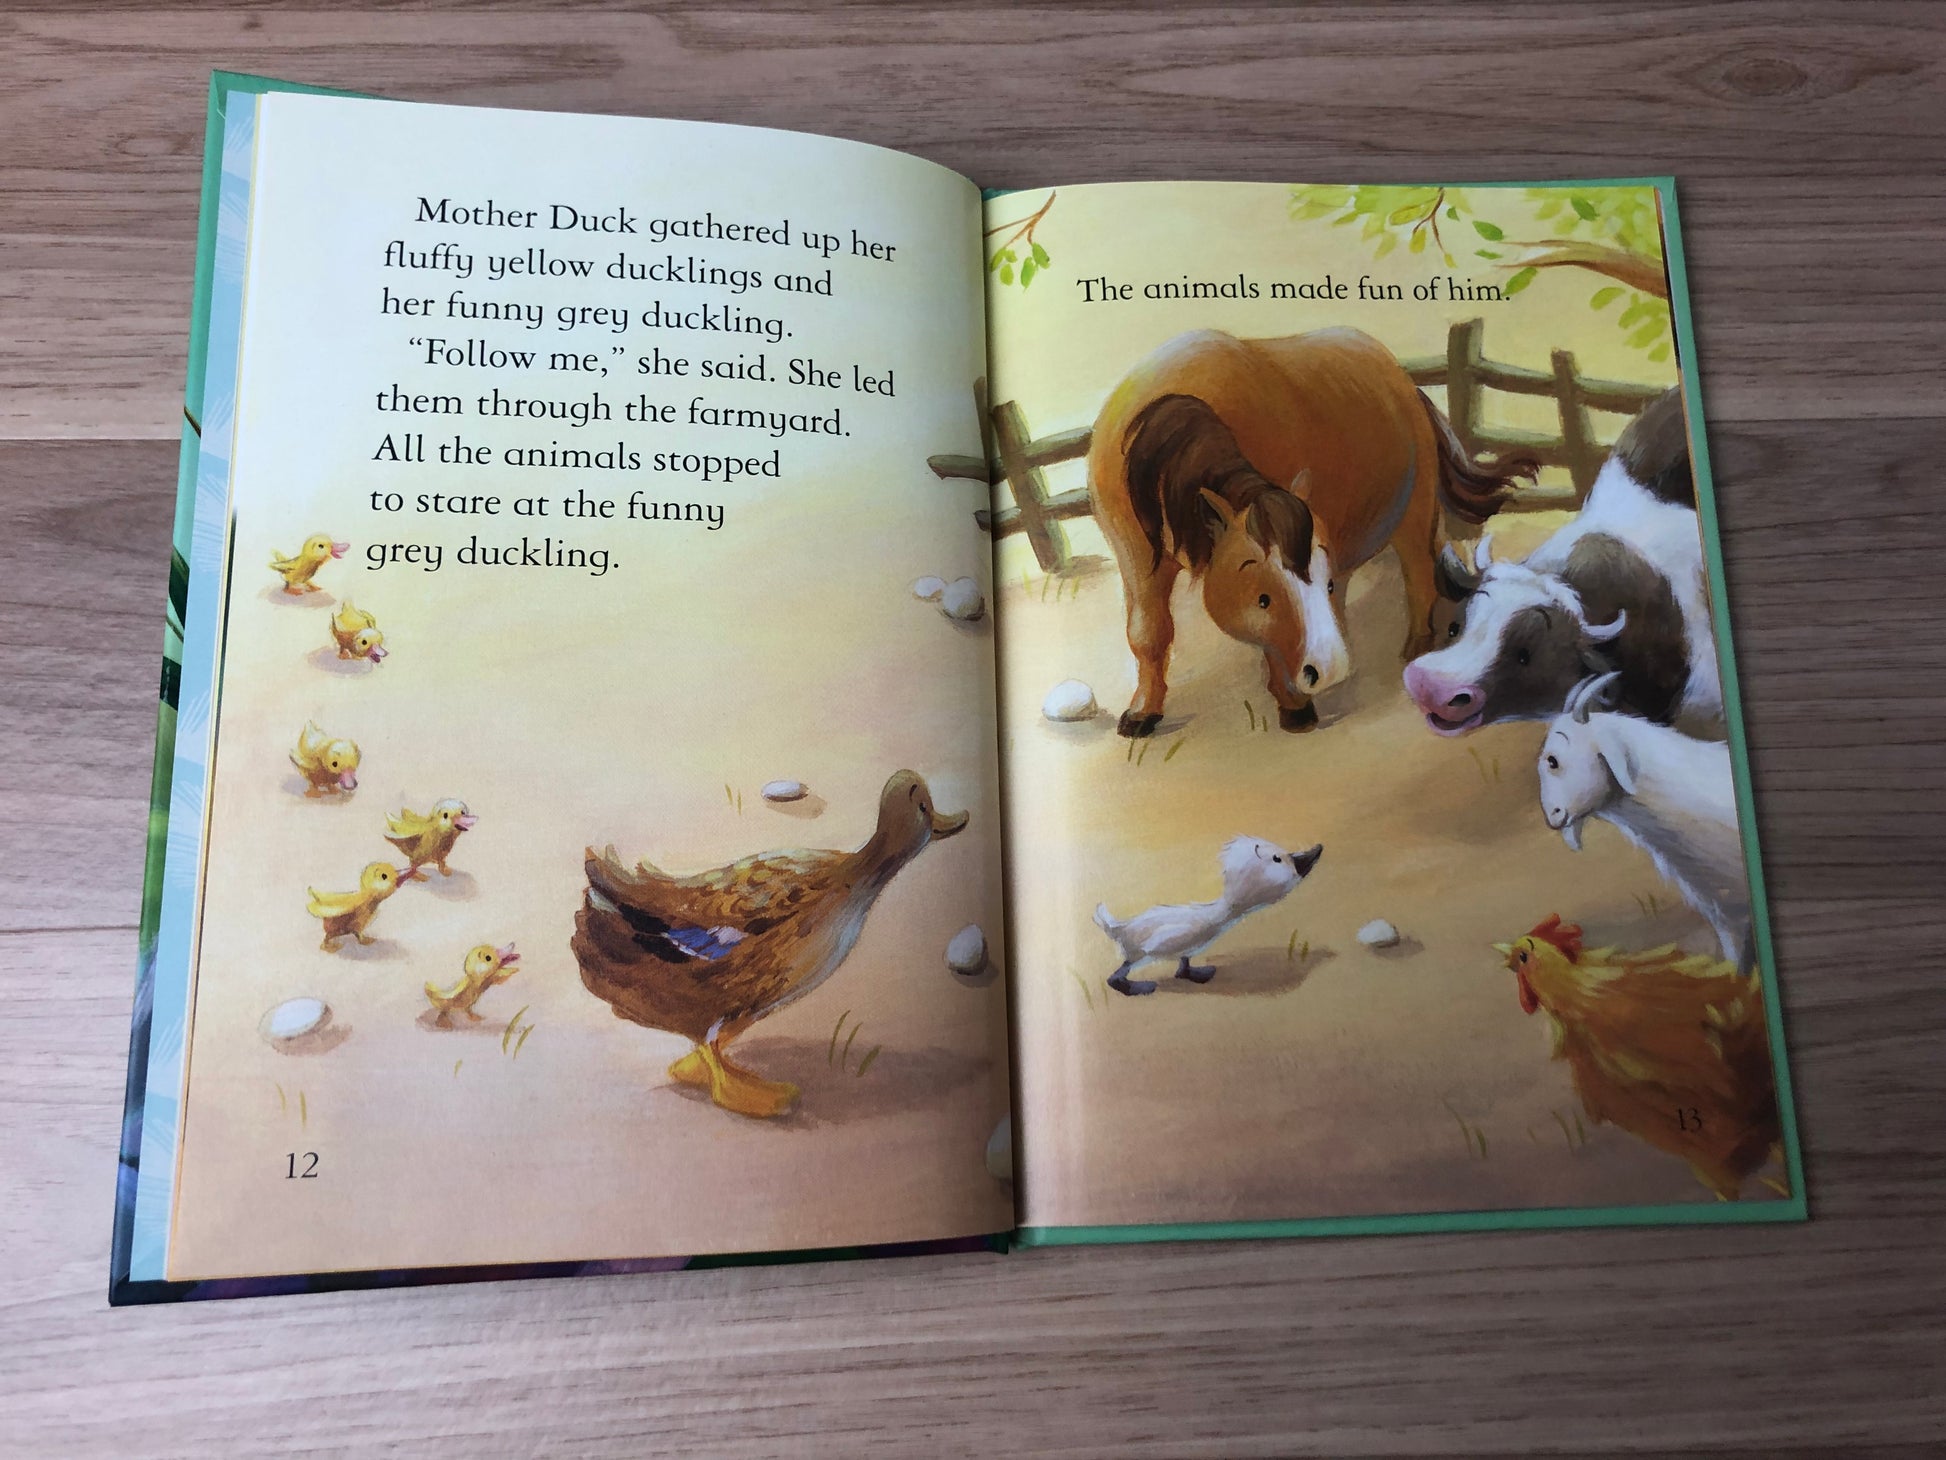 the ugly duckling book